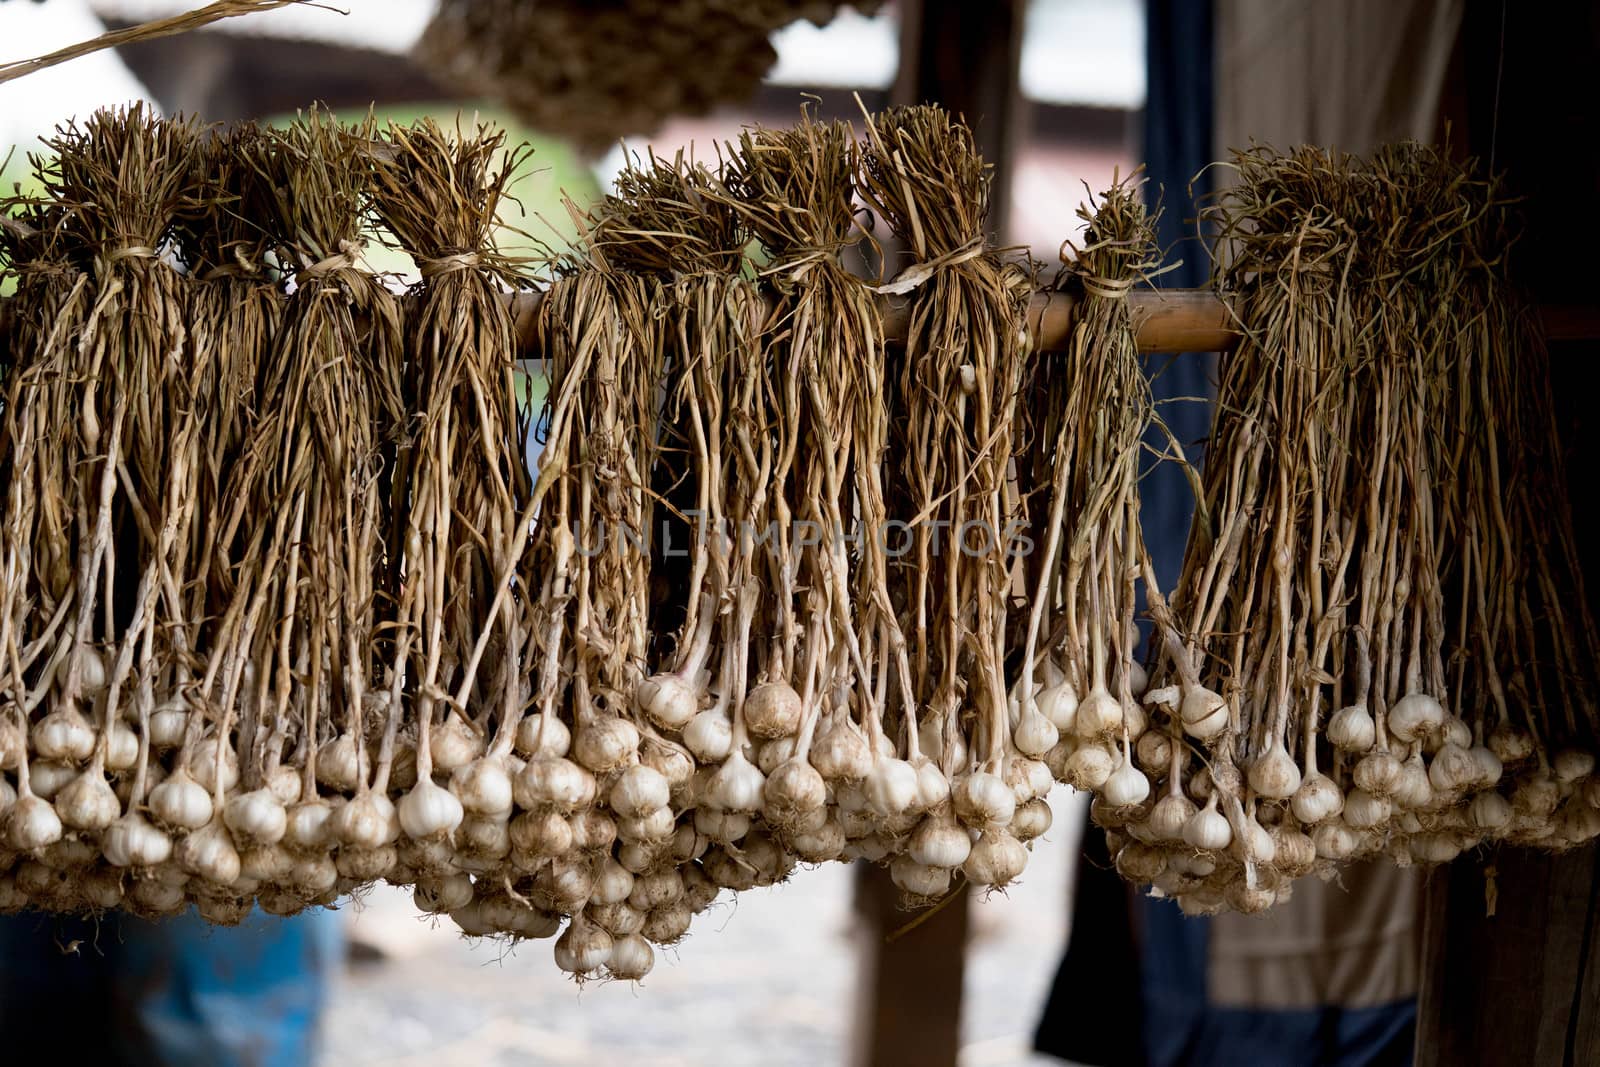 Garlic is tied up to be ready for distribution to the customer or To propagate in the growing season.